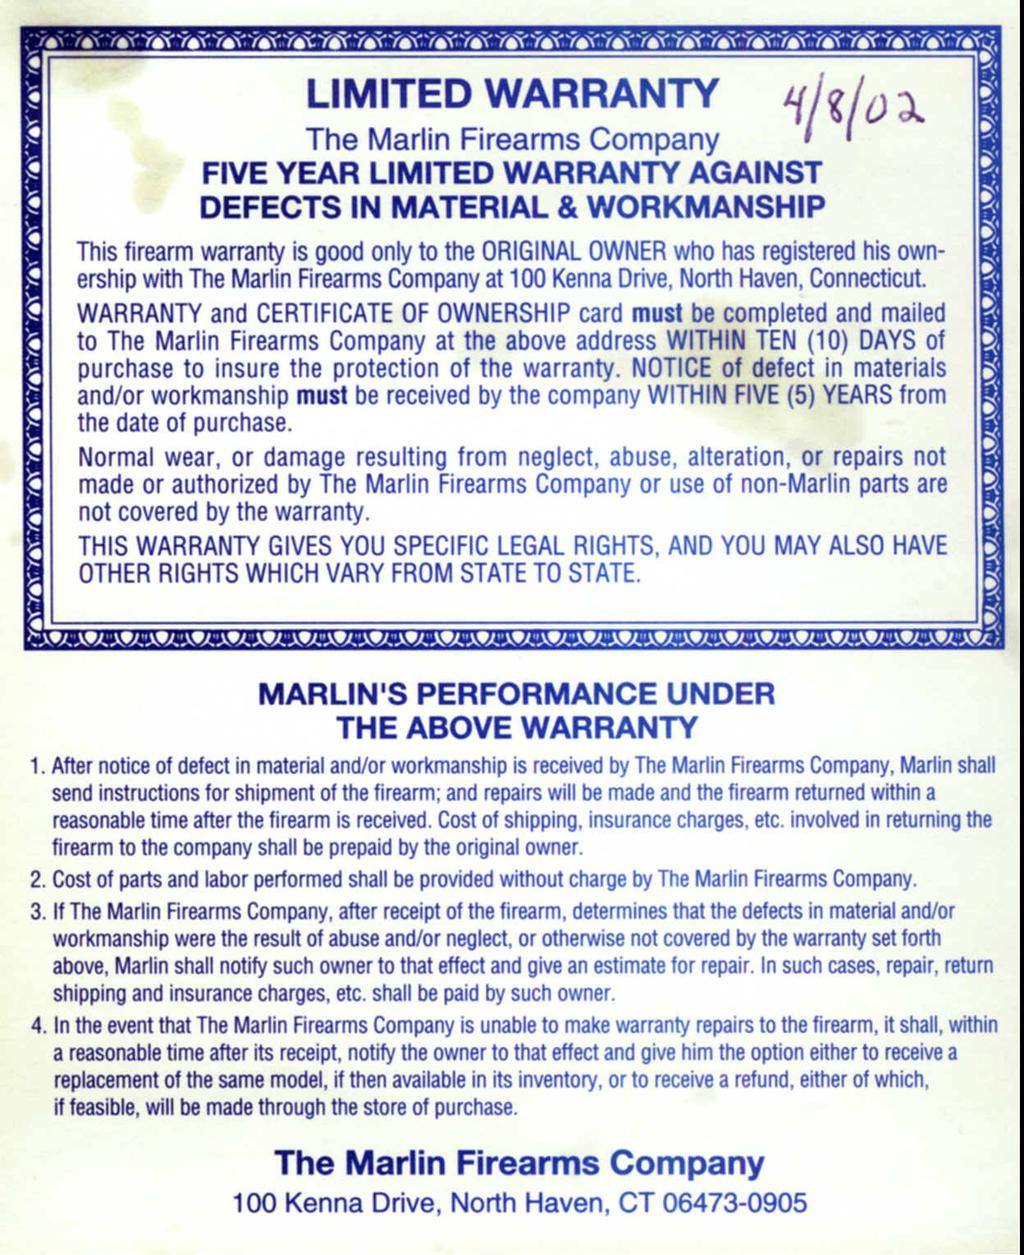 LIMITED WARRANTY The Marlin Firearms Company FIVE YEAR LIMITED WARRANTY AGAINST DEFECTS IN MATERIAL & WORKMANSHIP This firearm warranty is good only to the ORIGINAL OWNER who has registered his